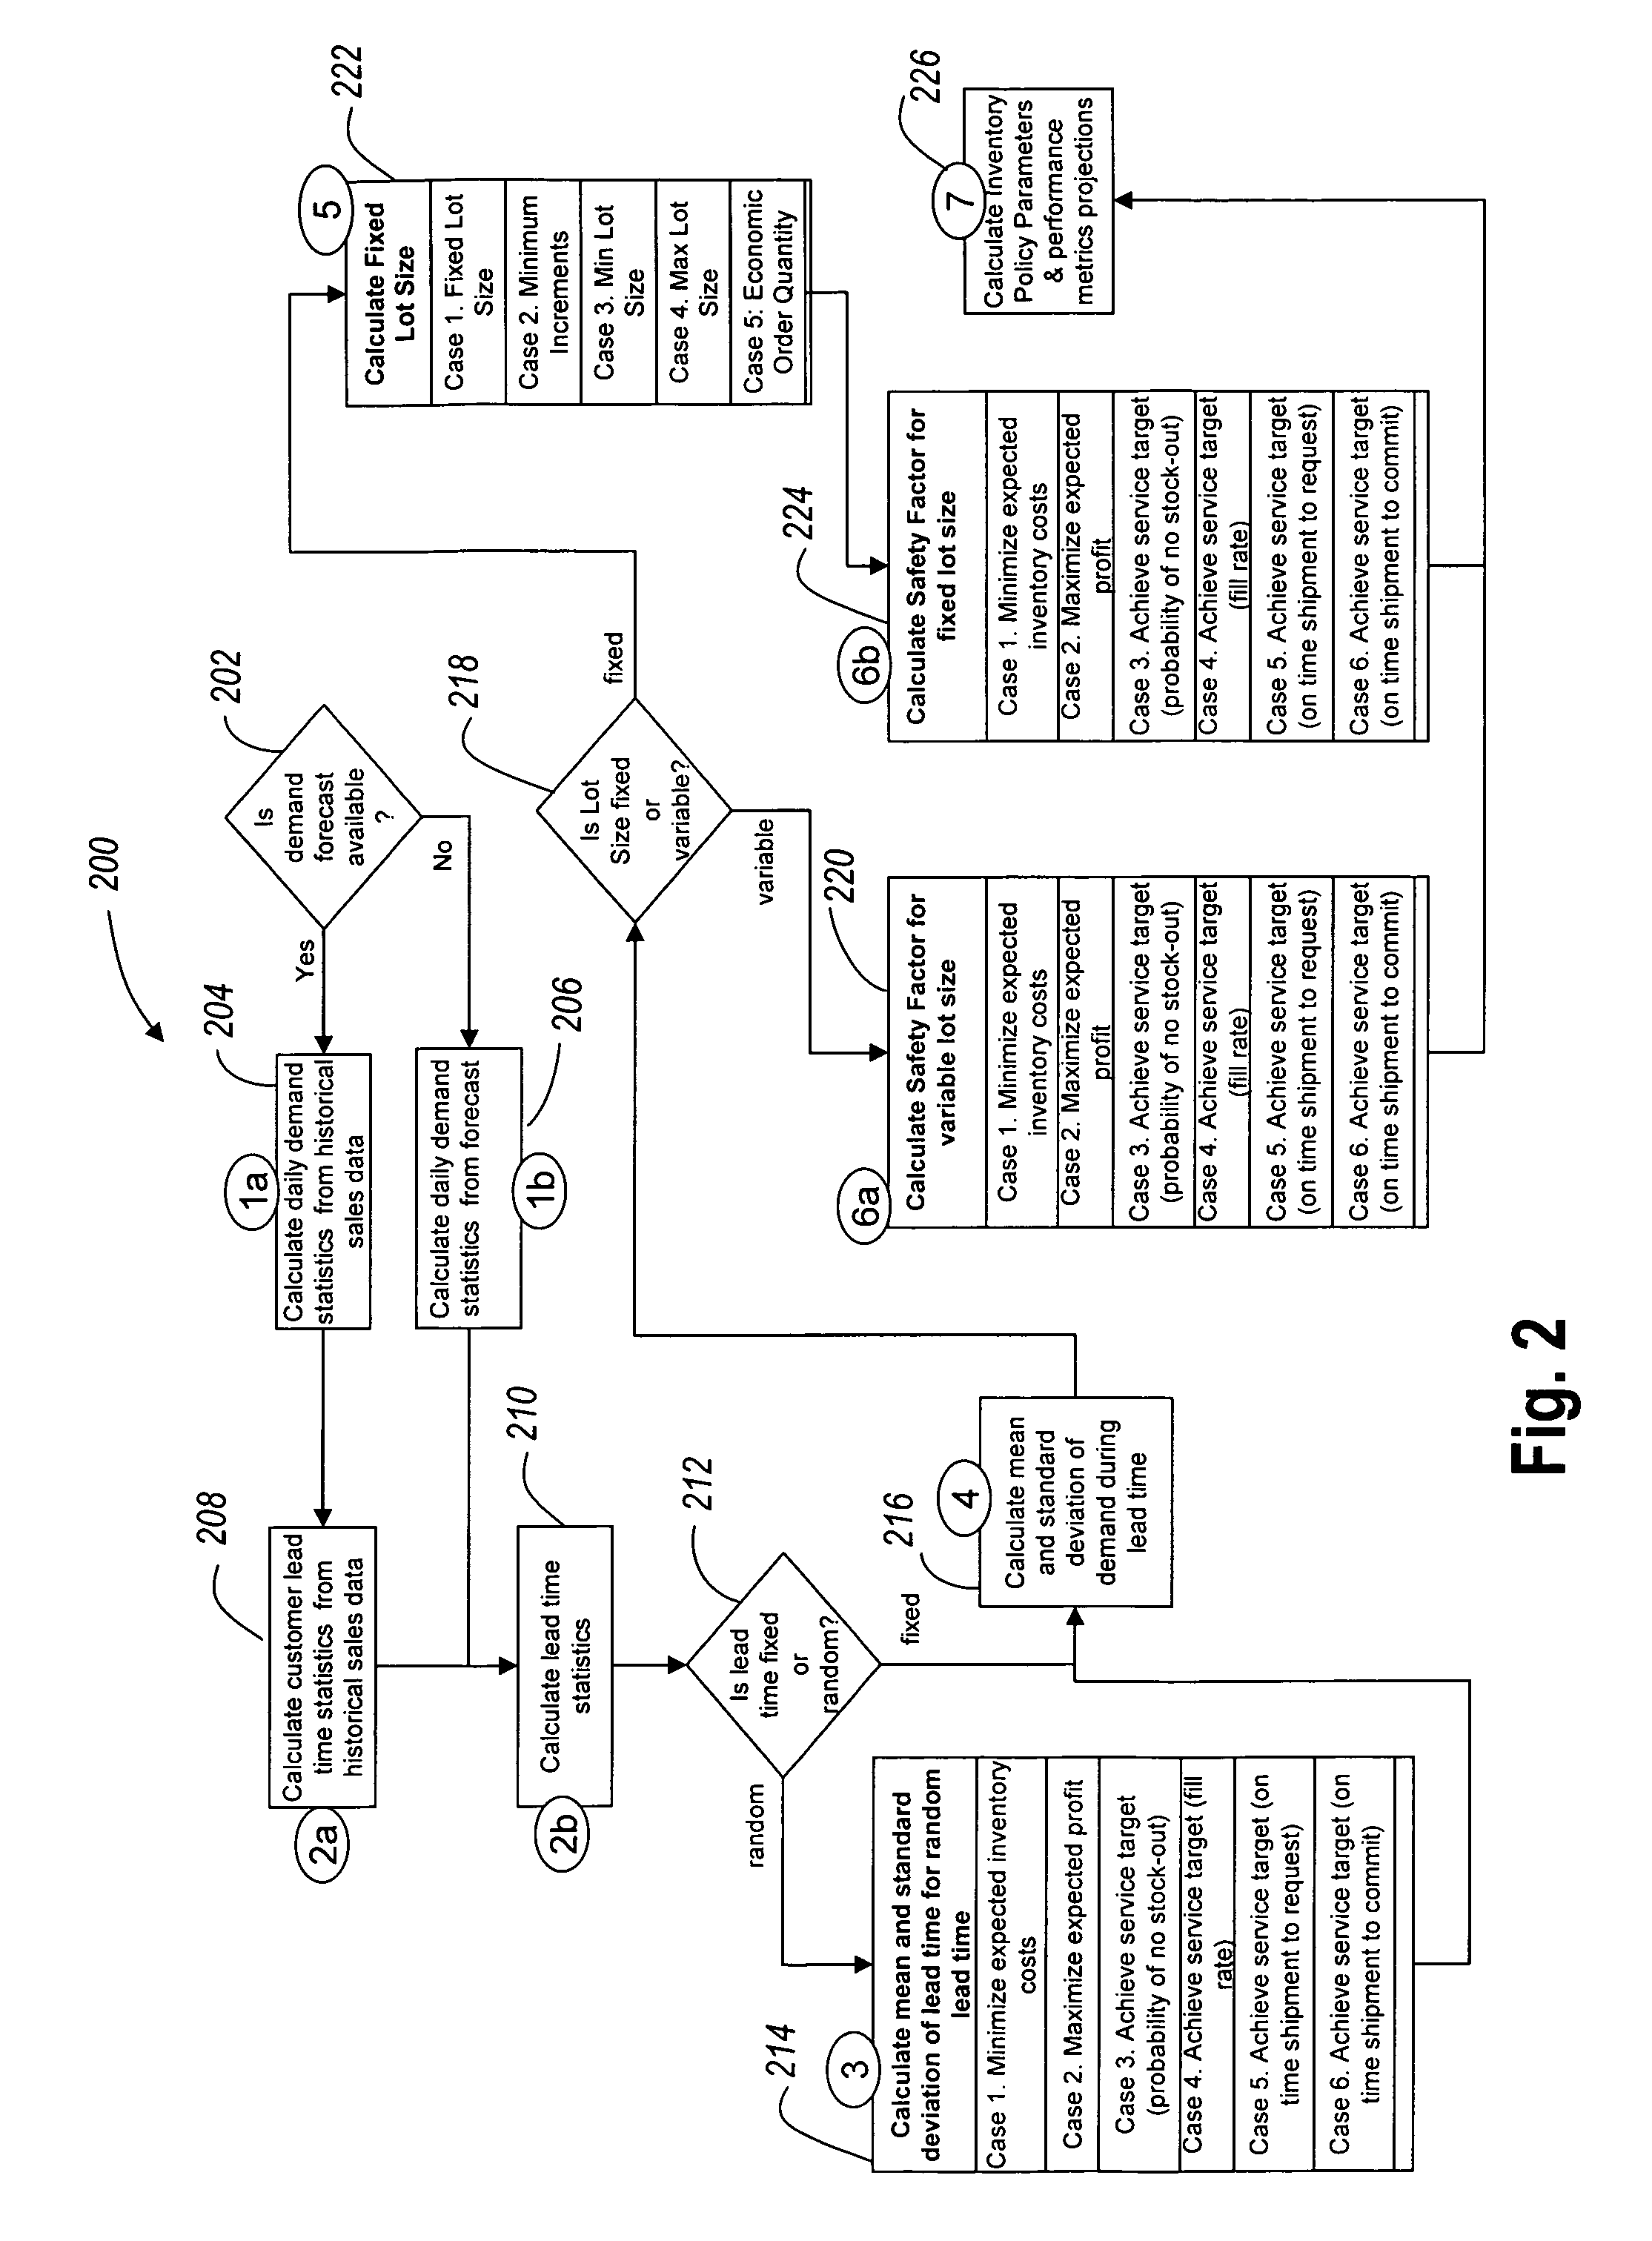 Methods and systems for inventory policy generation using structured query language